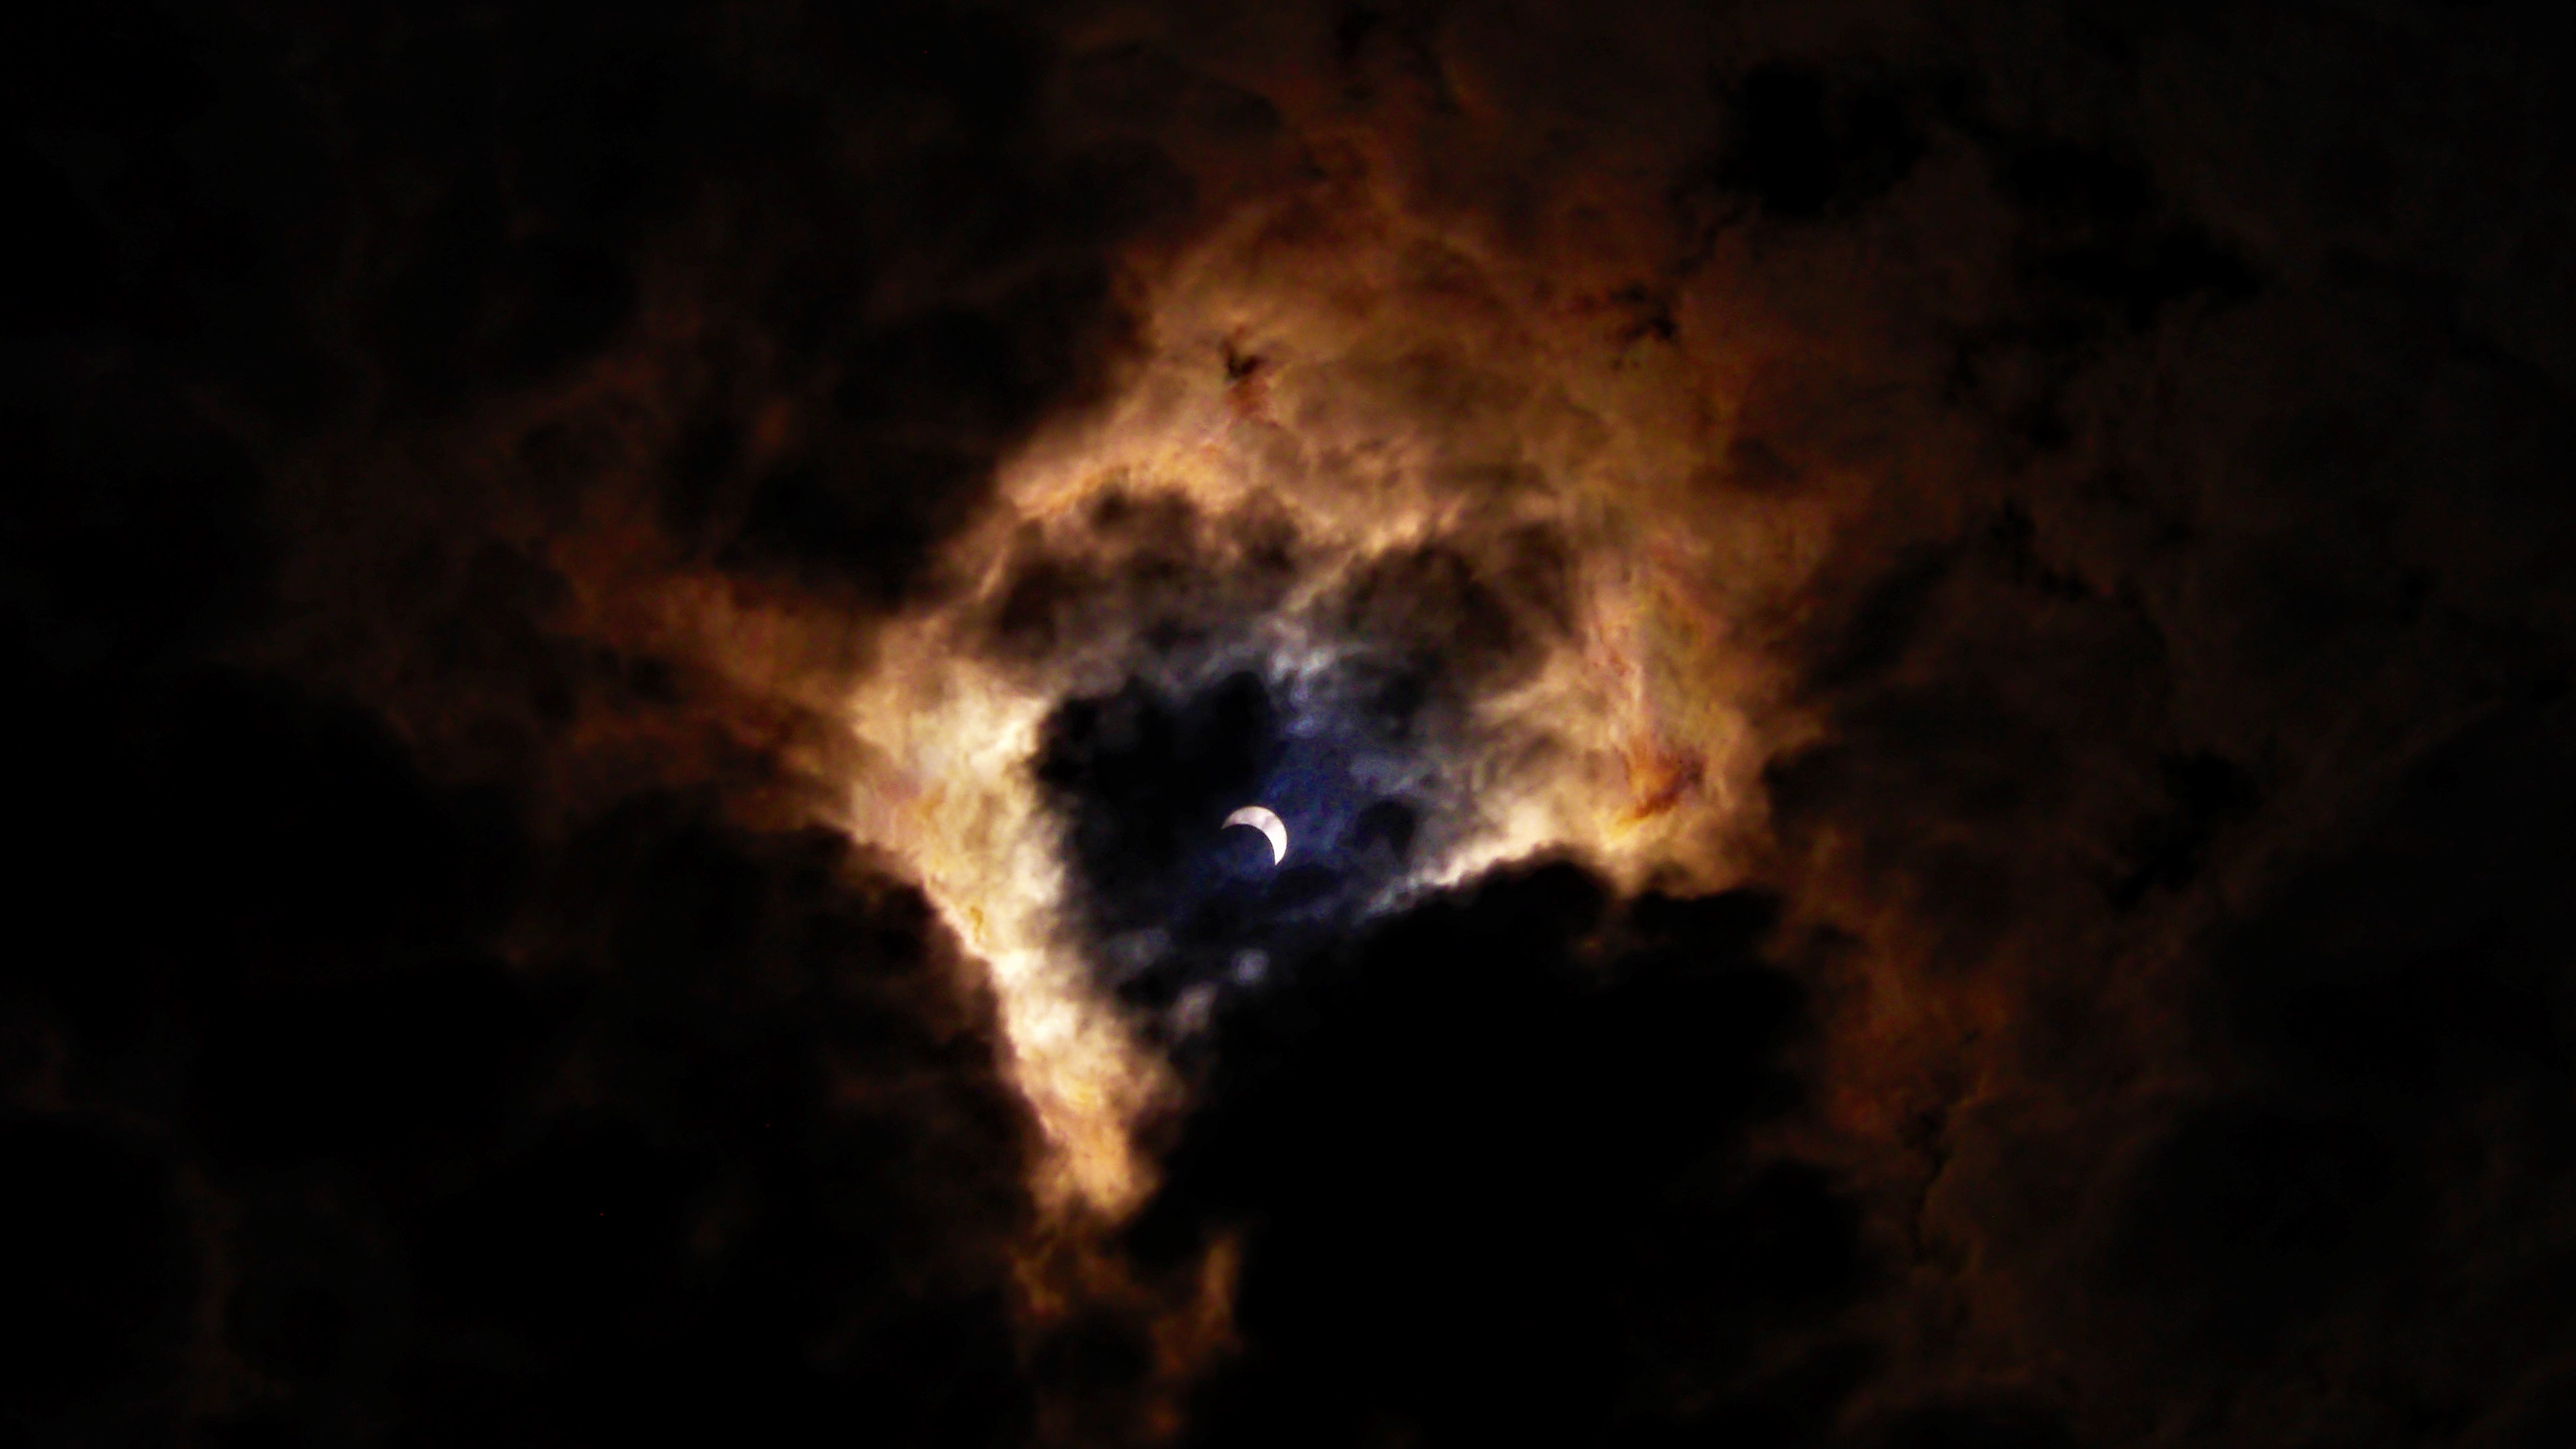 Eclipse in the Clouds